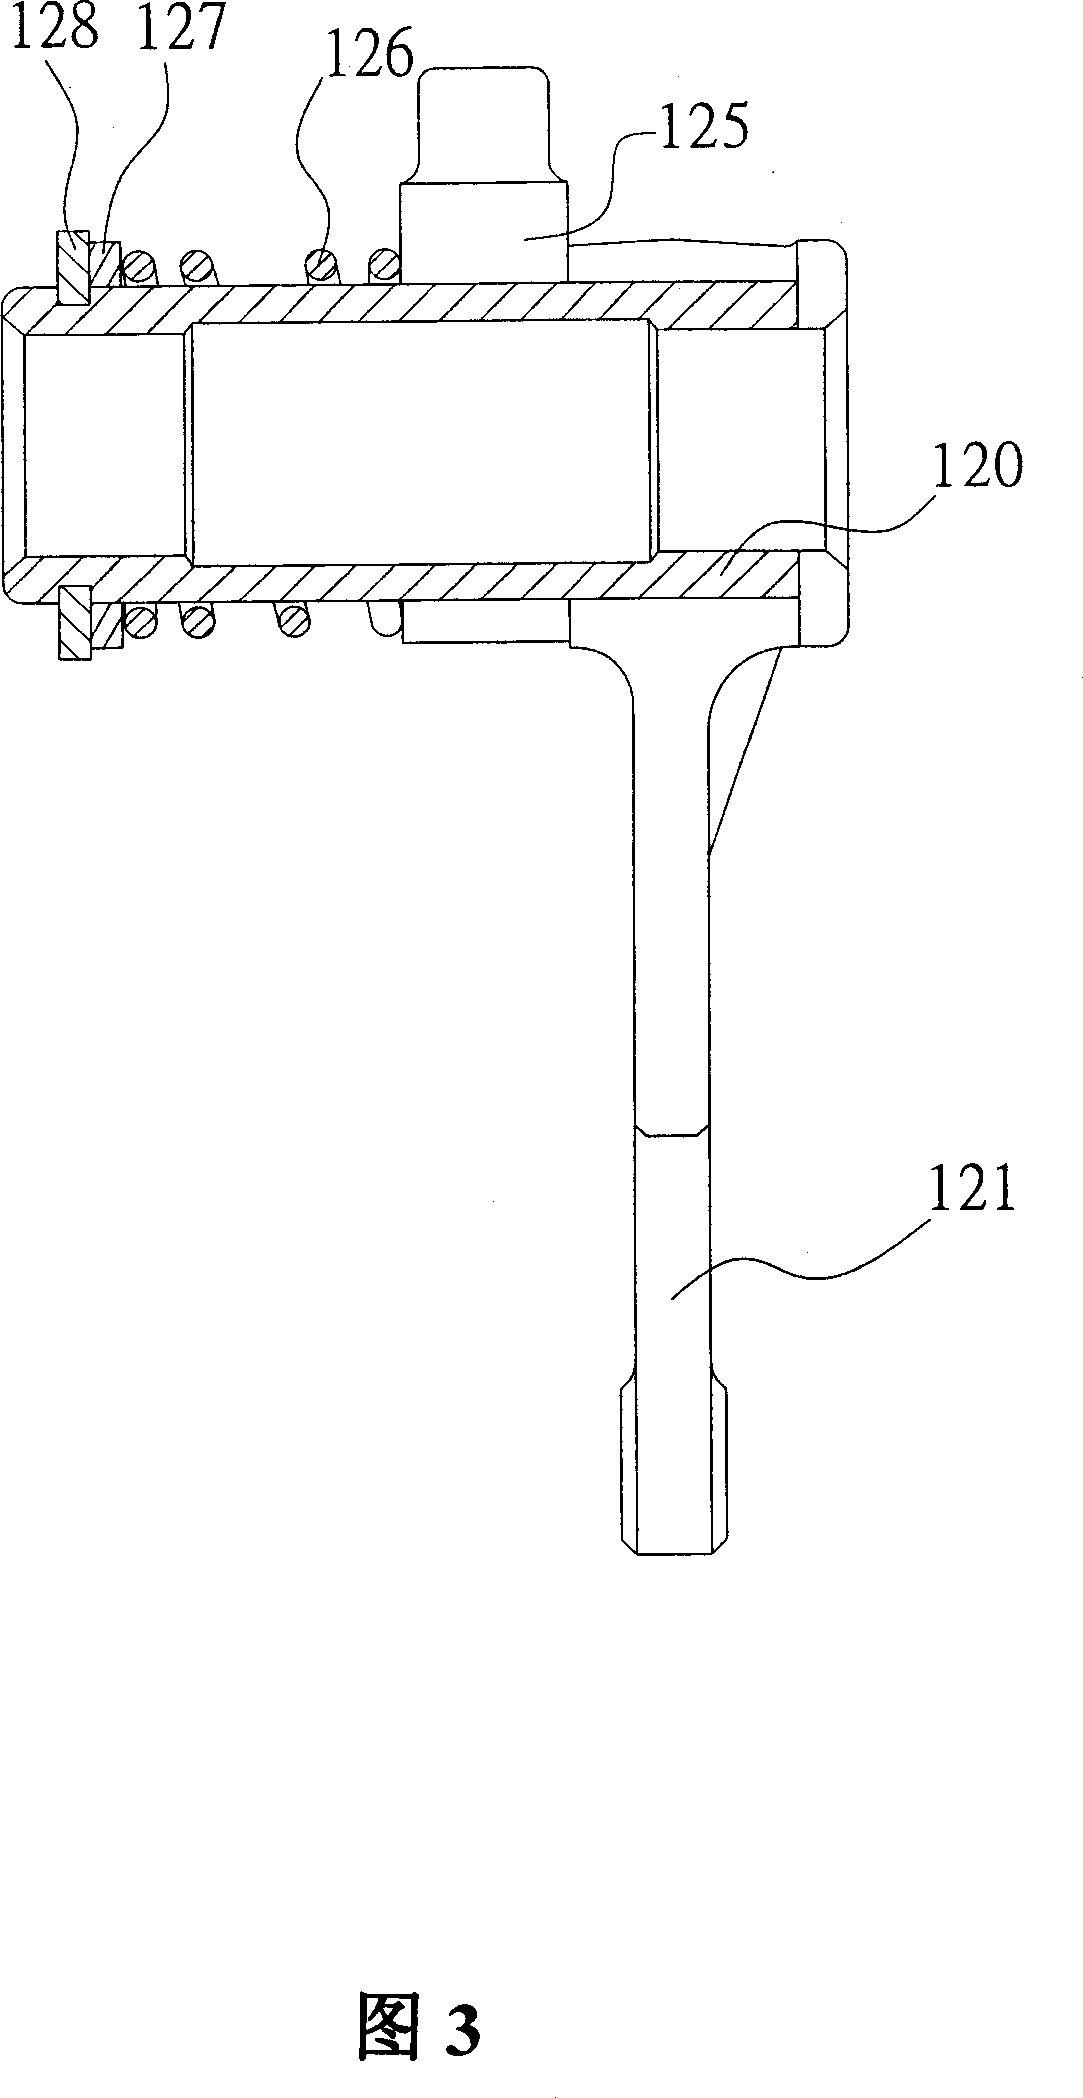 Pull-fork assembly of vehicle